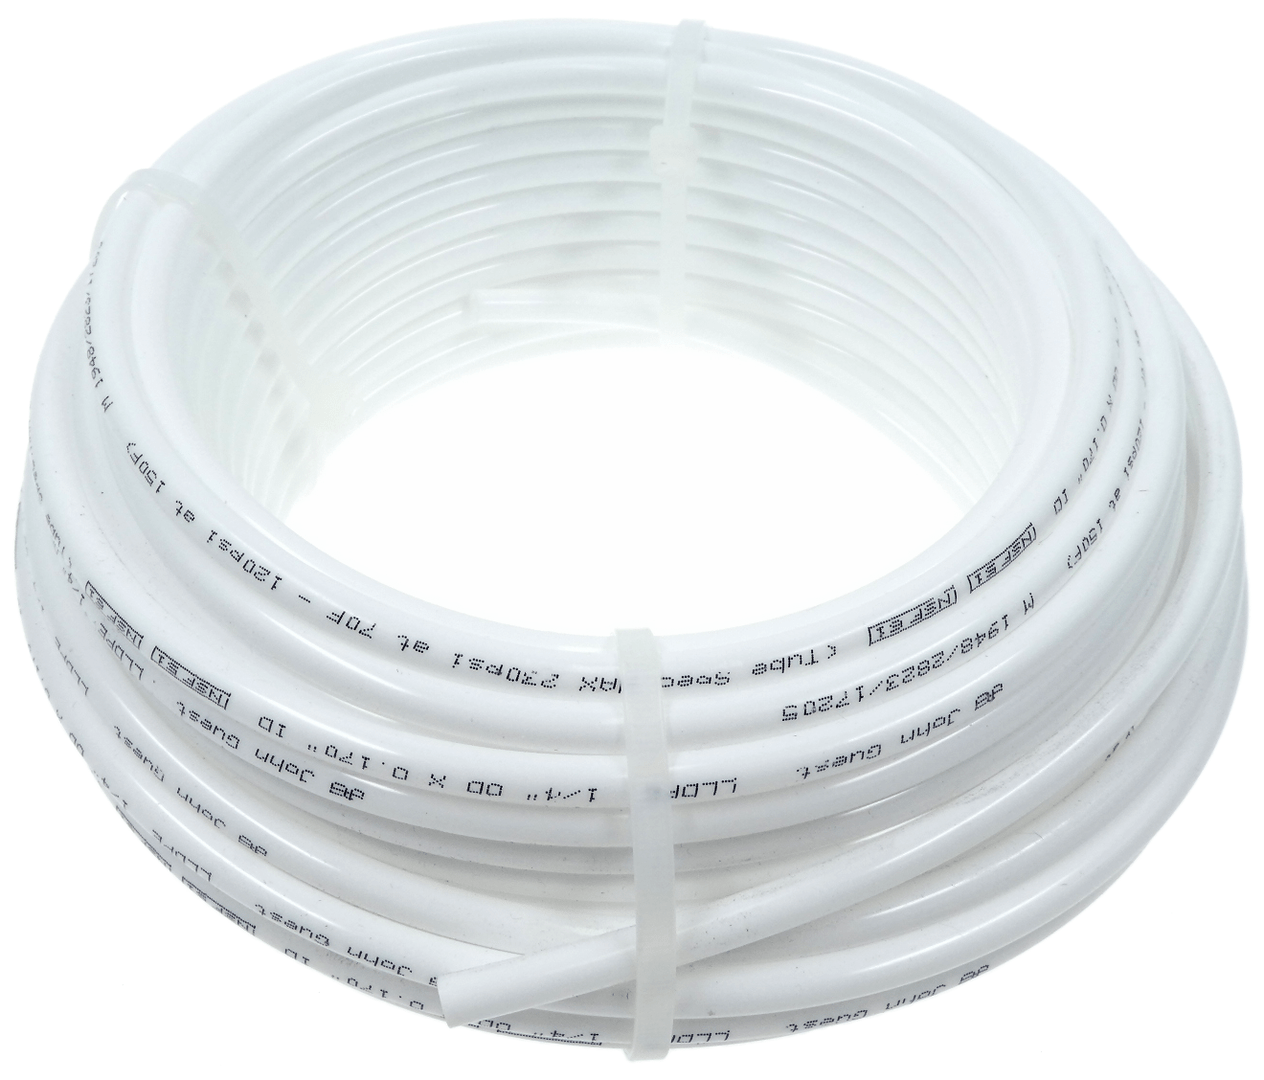 Samsung refrigerator and others universal hose for water connection,length 20 m Refrigerator water filters, dampers, ice cream tanks, hoses and other parts